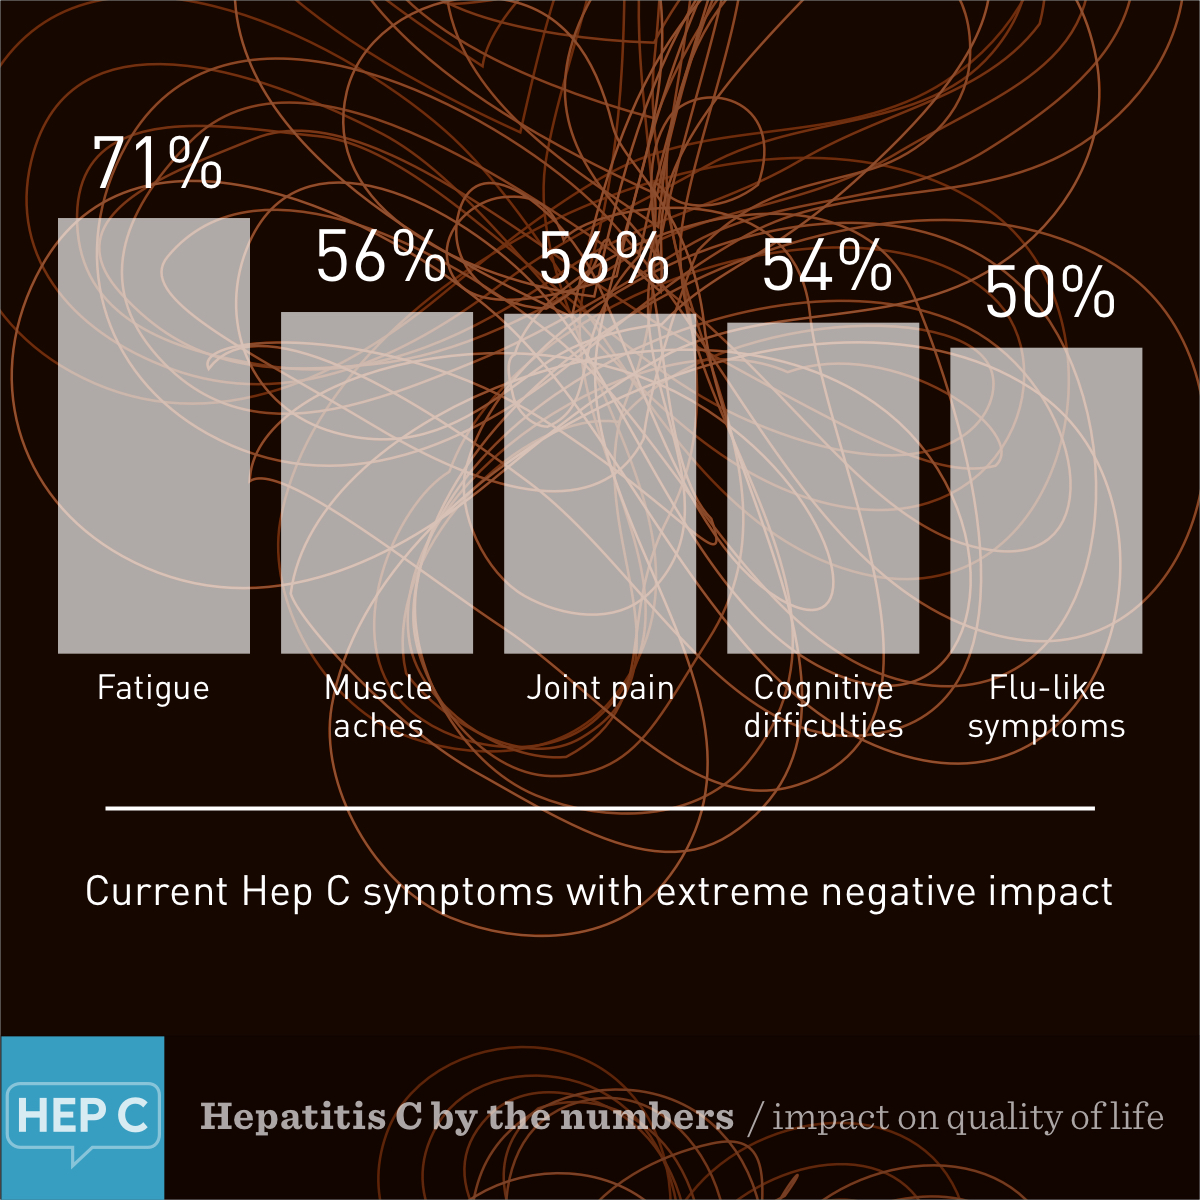 Hepatitis C by the numbers: Impact on Quality of Life